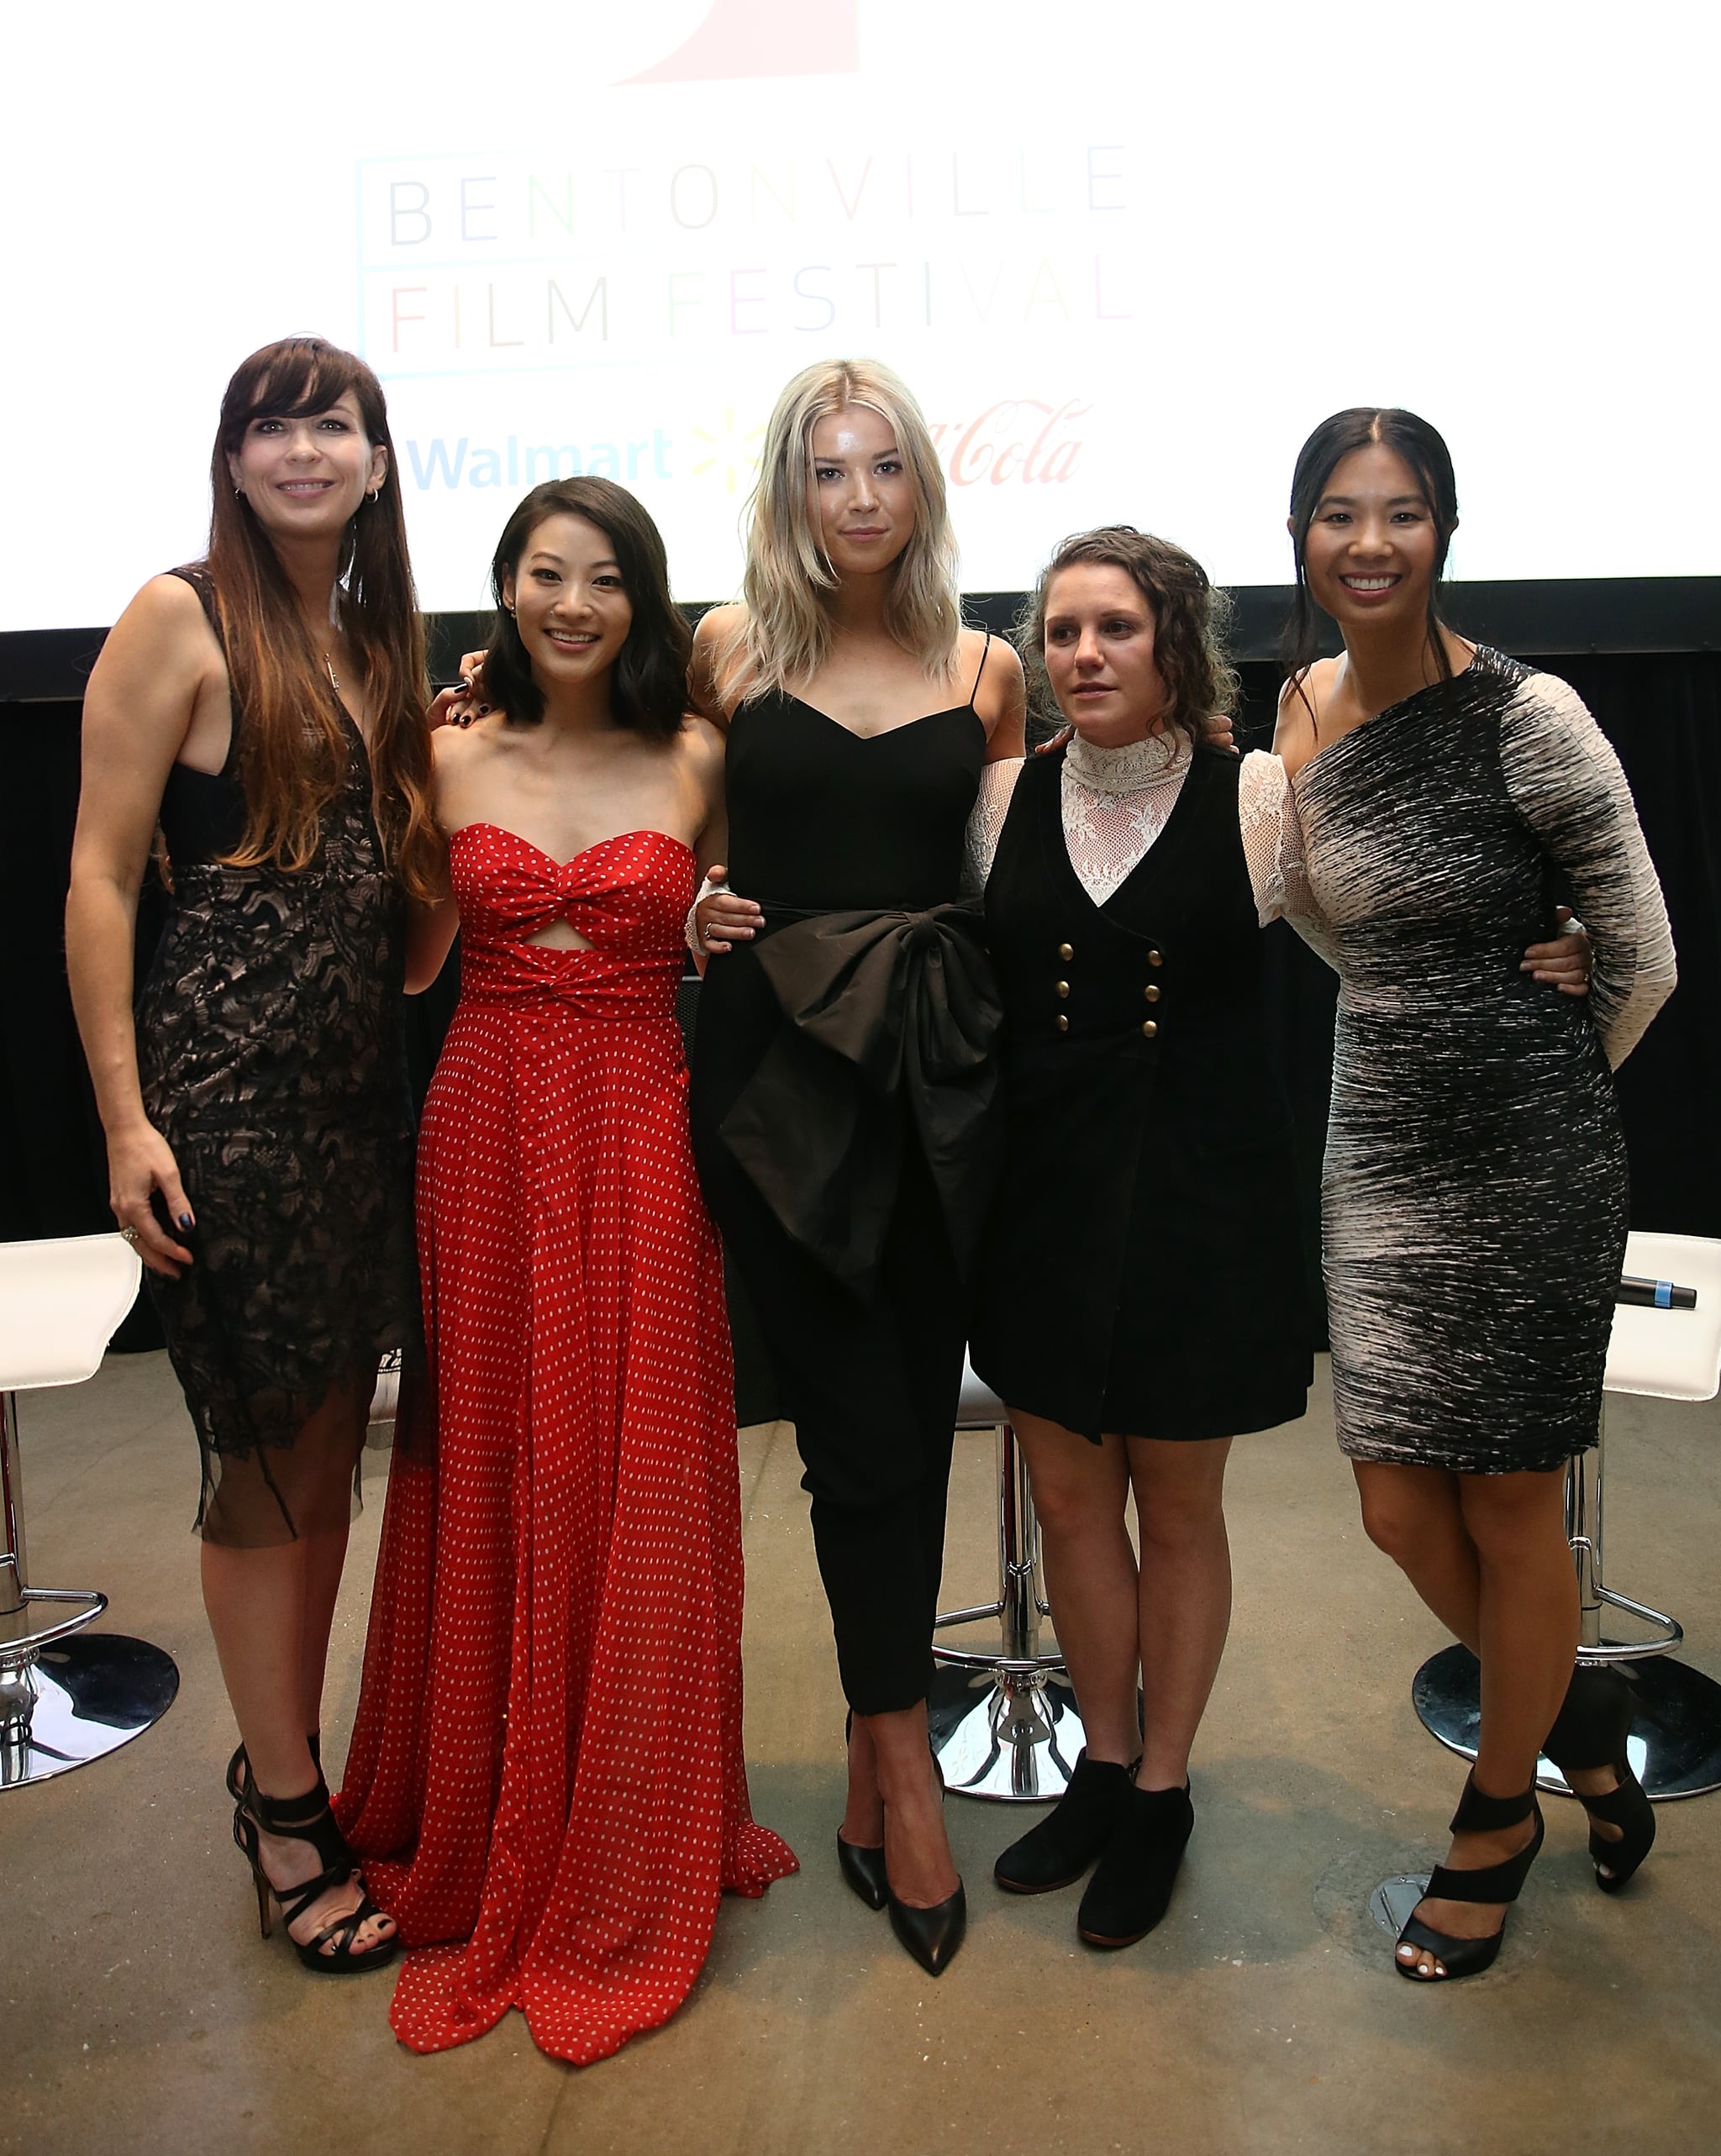 BENTONVILLE, AR - MAY 01:  (L-R) Elissa Down, Arden Cho, Meghan Rienks, Liz Destro, and Marilyn Fu attend The Honor List premiere at the 4th Annual Bentonville Film Festival on May 1, 2018 in Bentonville, Arkansas.  (Photo by Phillip Faraone/Getty Images for Bentonville Film Festival)